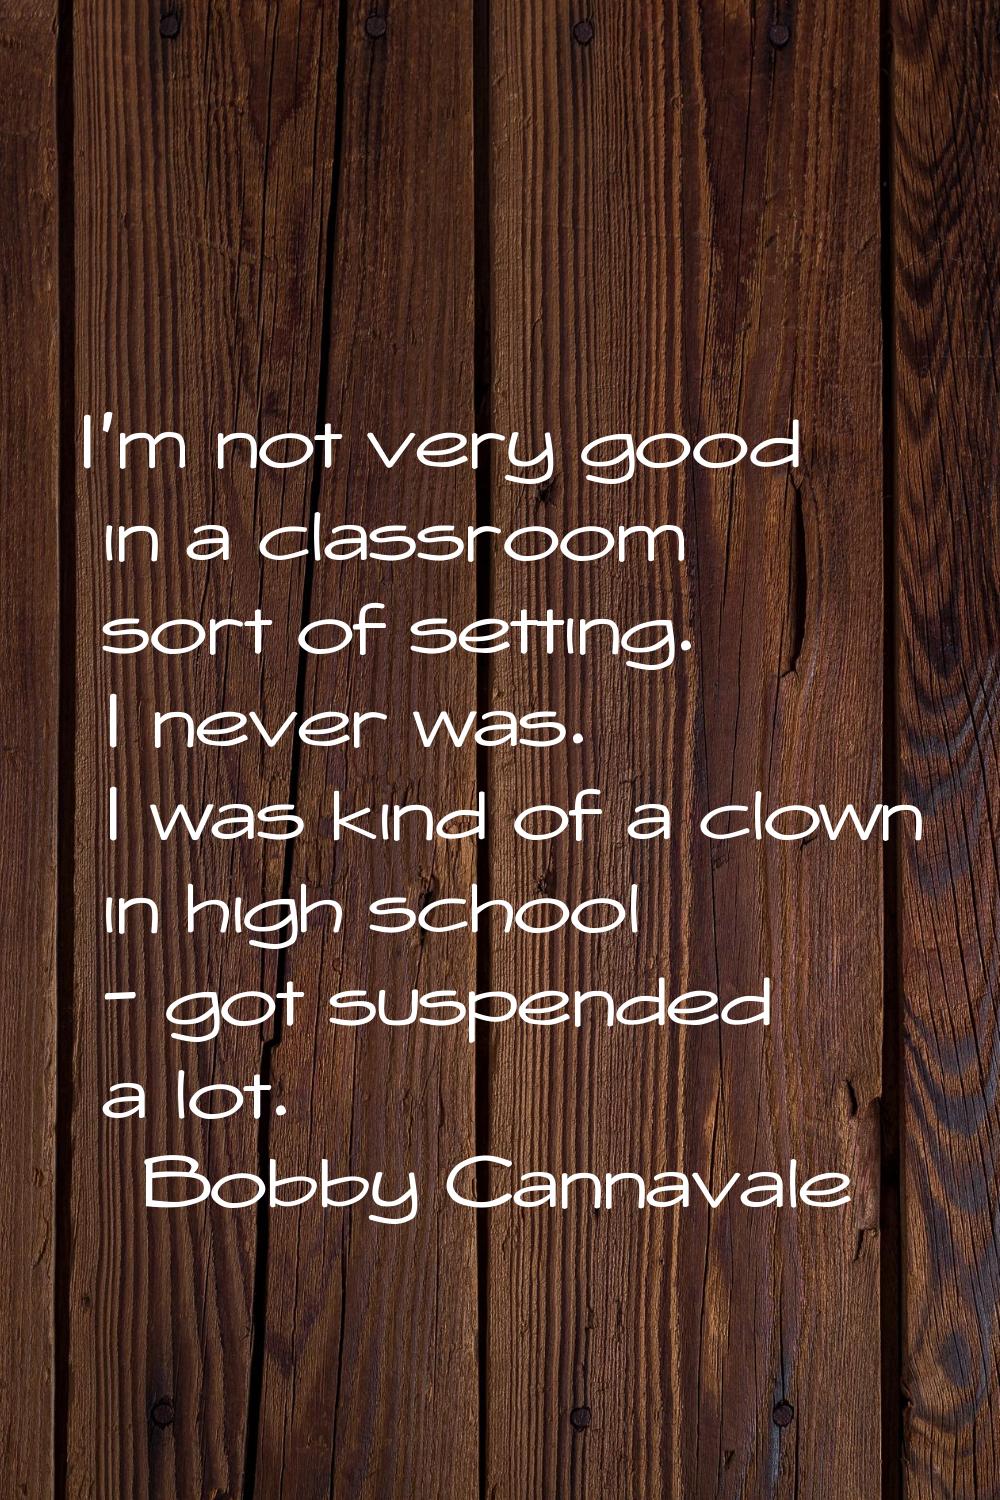 I'm not very good in a classroom sort of setting. I never was. I was kind of a clown in high school